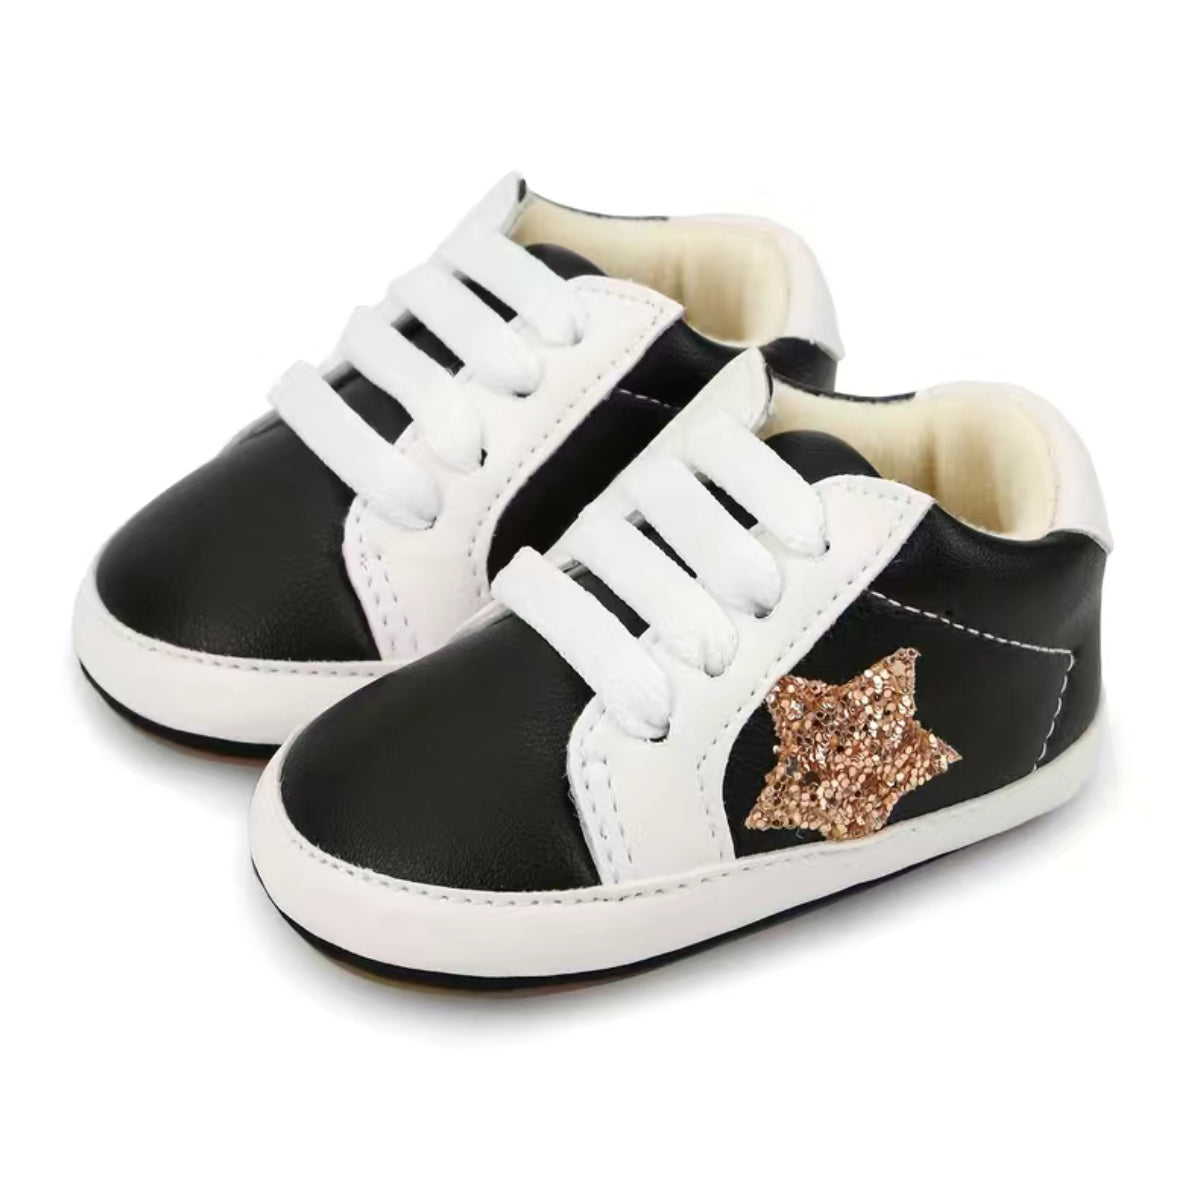 Star soft sole sneakers